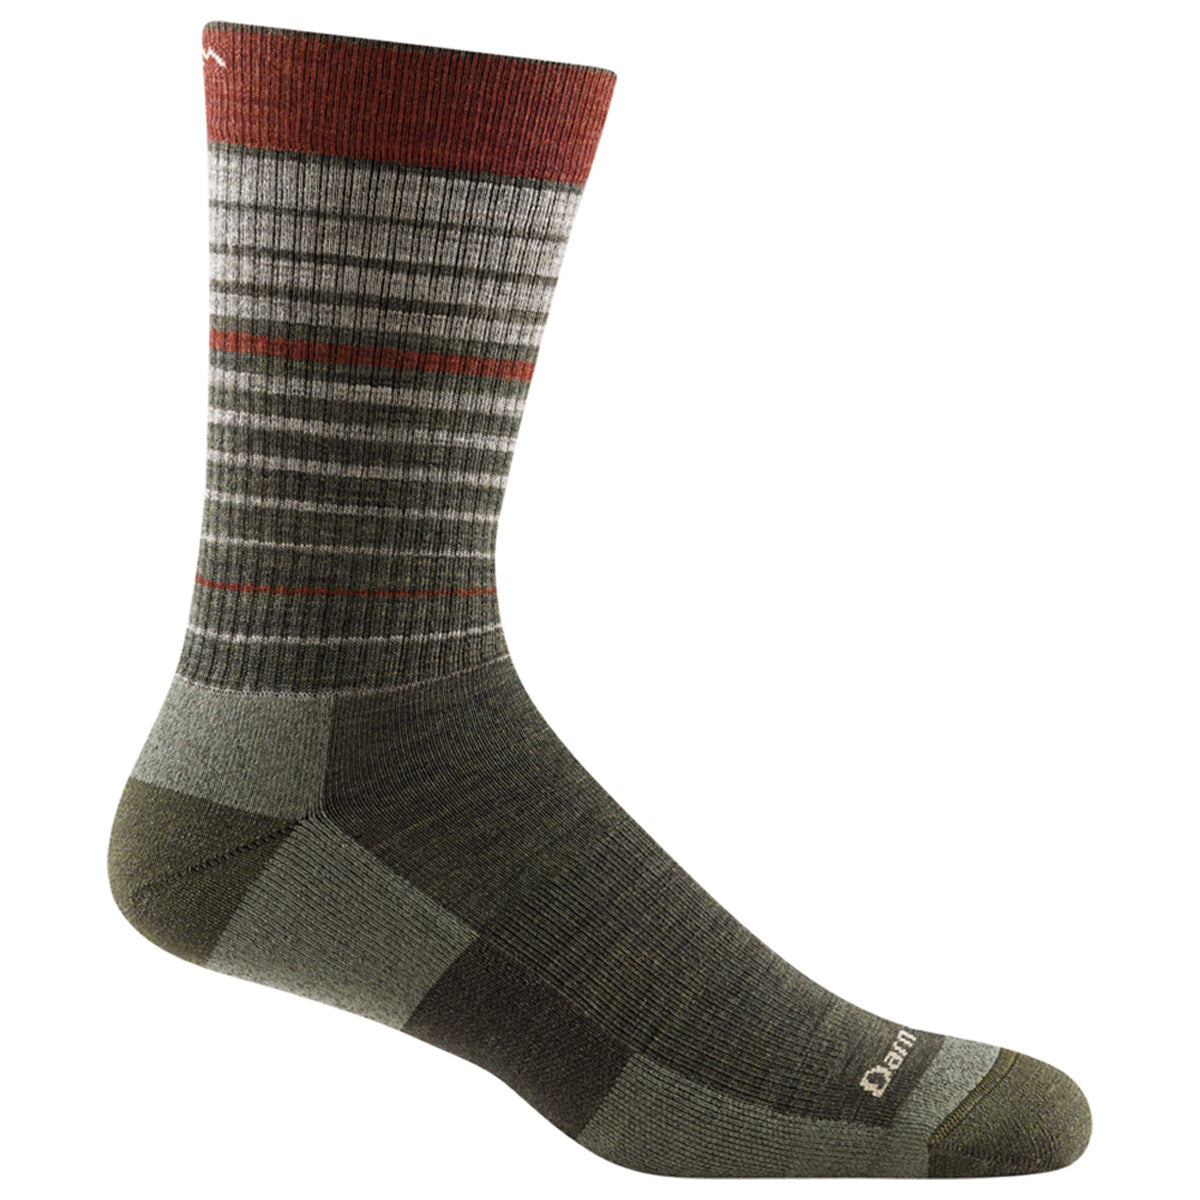 DARN TOUGH FREQUENCY CREW SOCKS FOREST - MENS